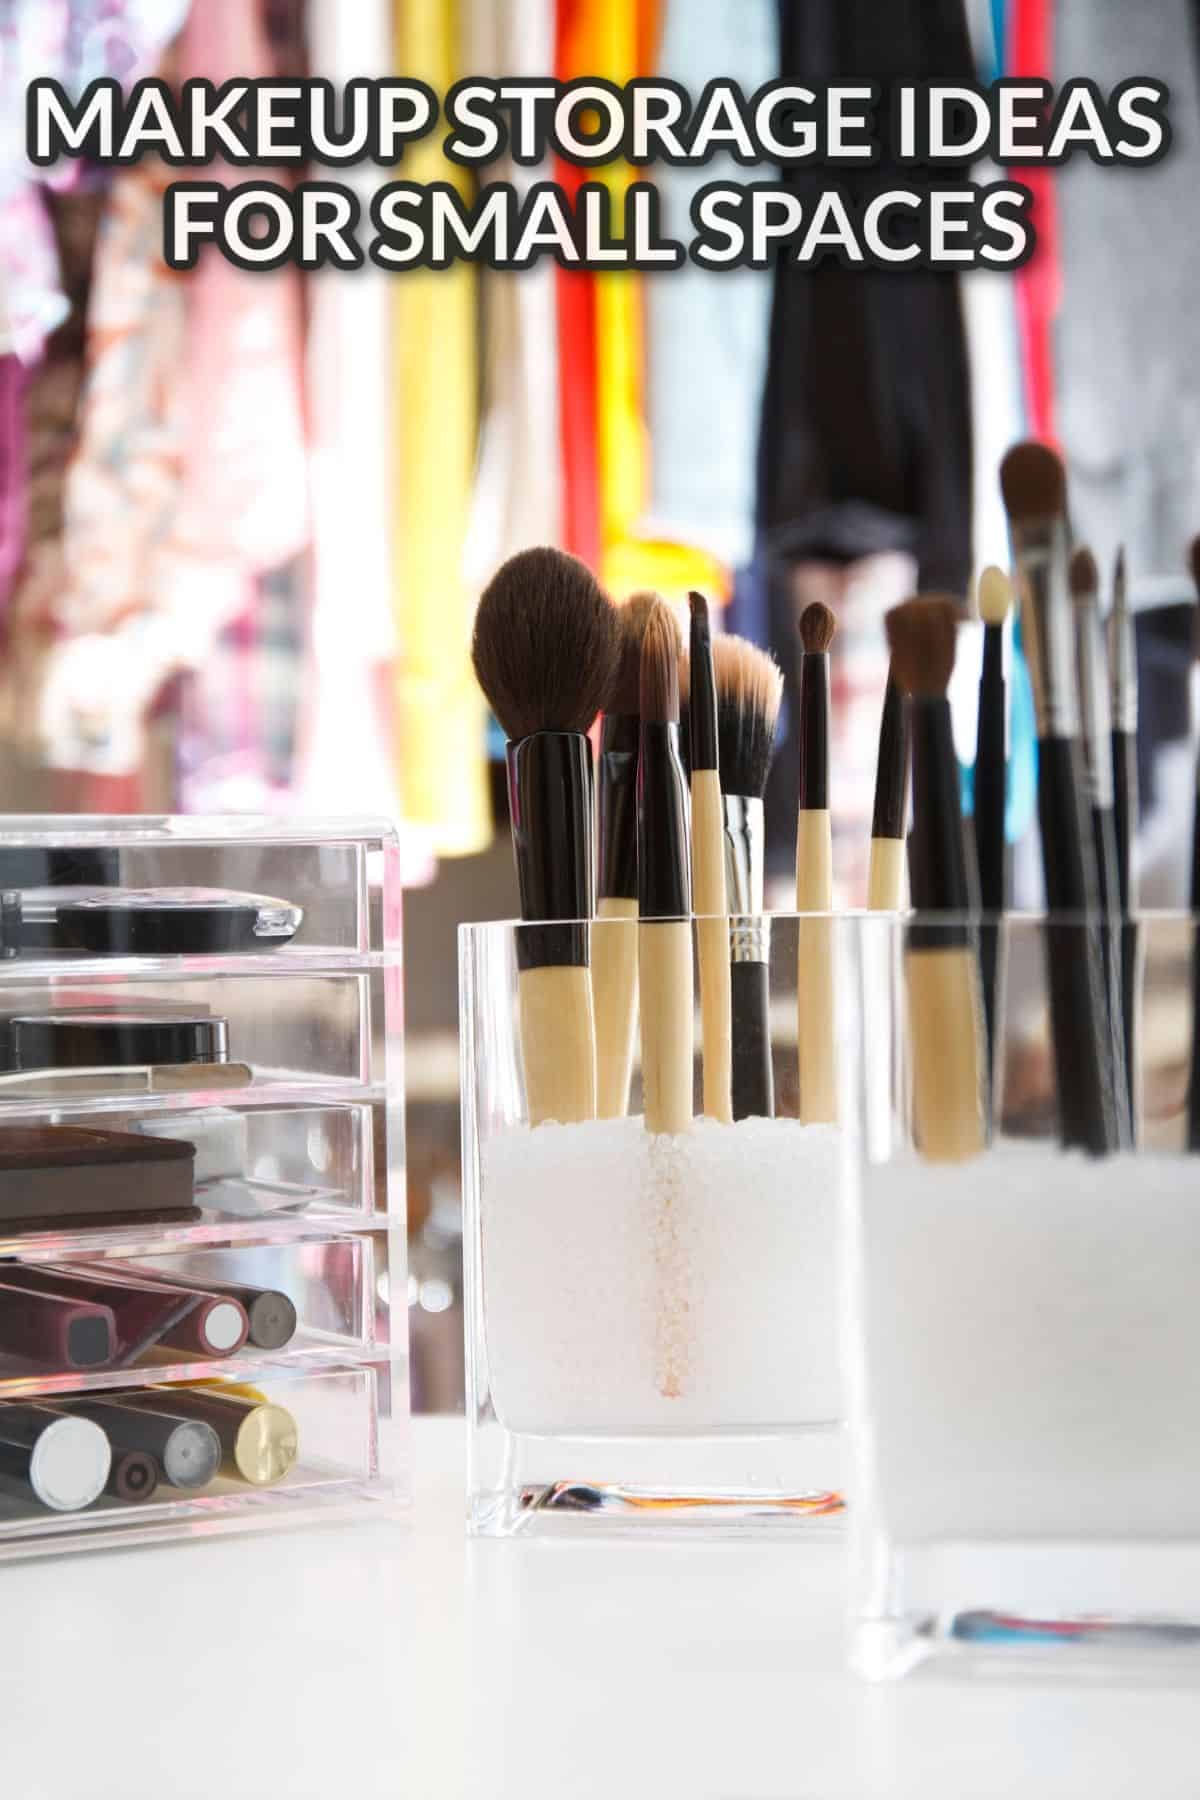 makeup storage ideas for small spaces text overlay.